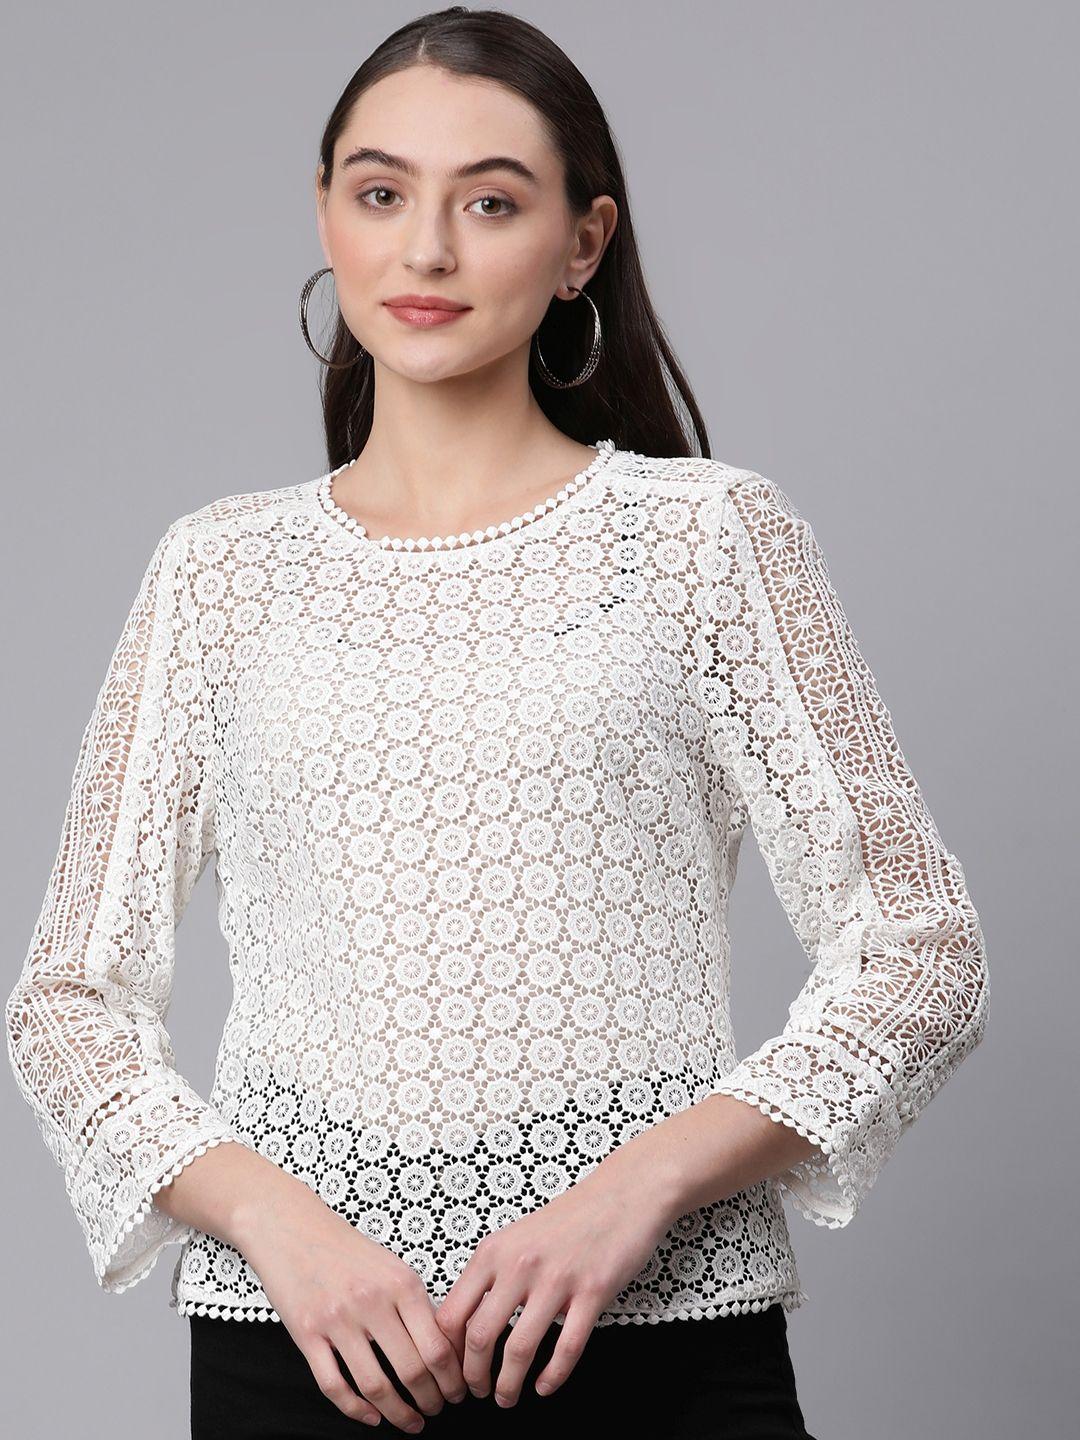 marks & spencer women white floral lace top